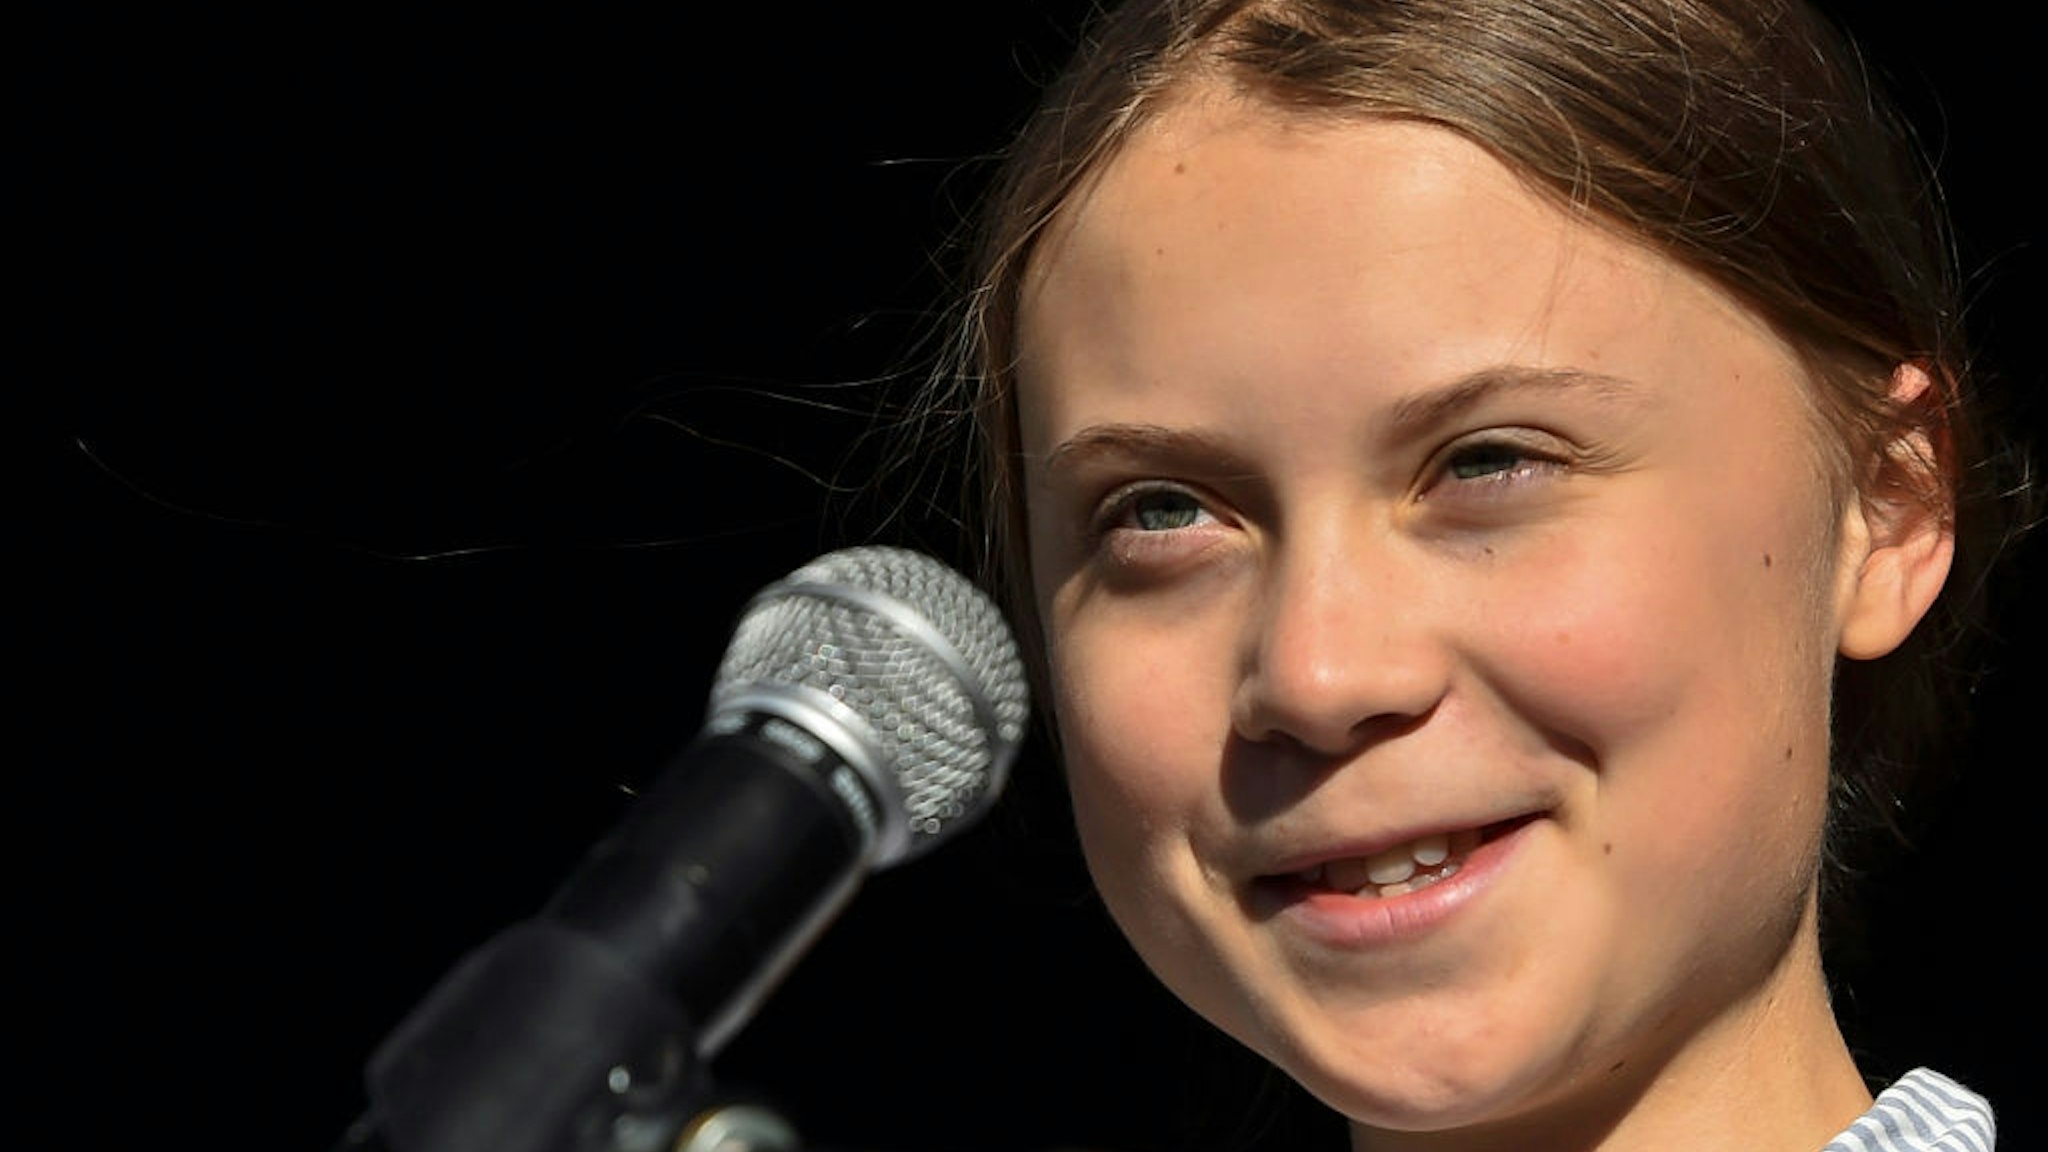 Swedish climate activist Greta Thunberg takes to the podium to address young activists and their supporters during the rally for action on climate change on September 27, 2019 in Montreal, Canada. Hundreds of thousands of people are expected to take part in what could be the city's largest climate march. (Photo by Minas Panagiotakis/Getty Images)